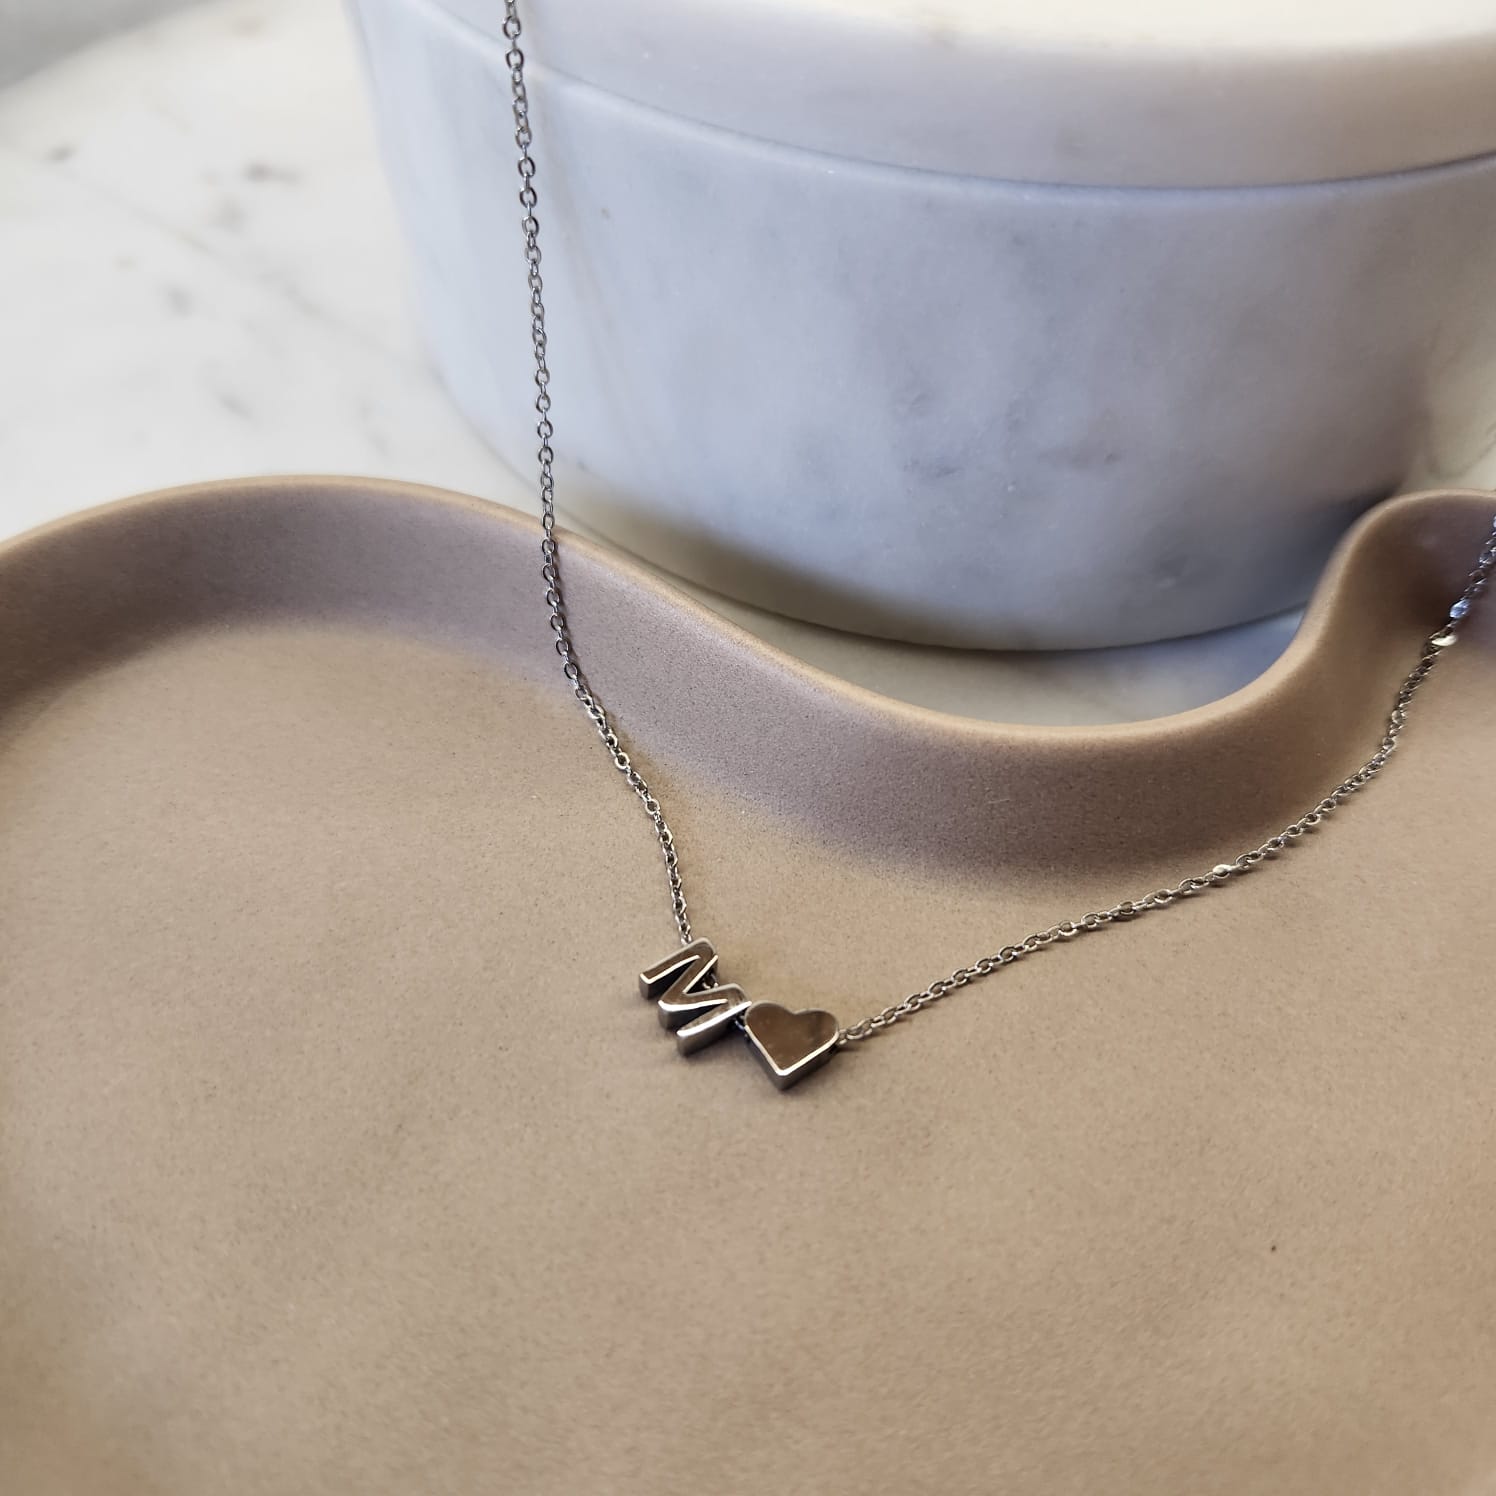 Buy Cheap Couple Initial Necklaces at GNN, Up to 40% Off - GetNameNecklace